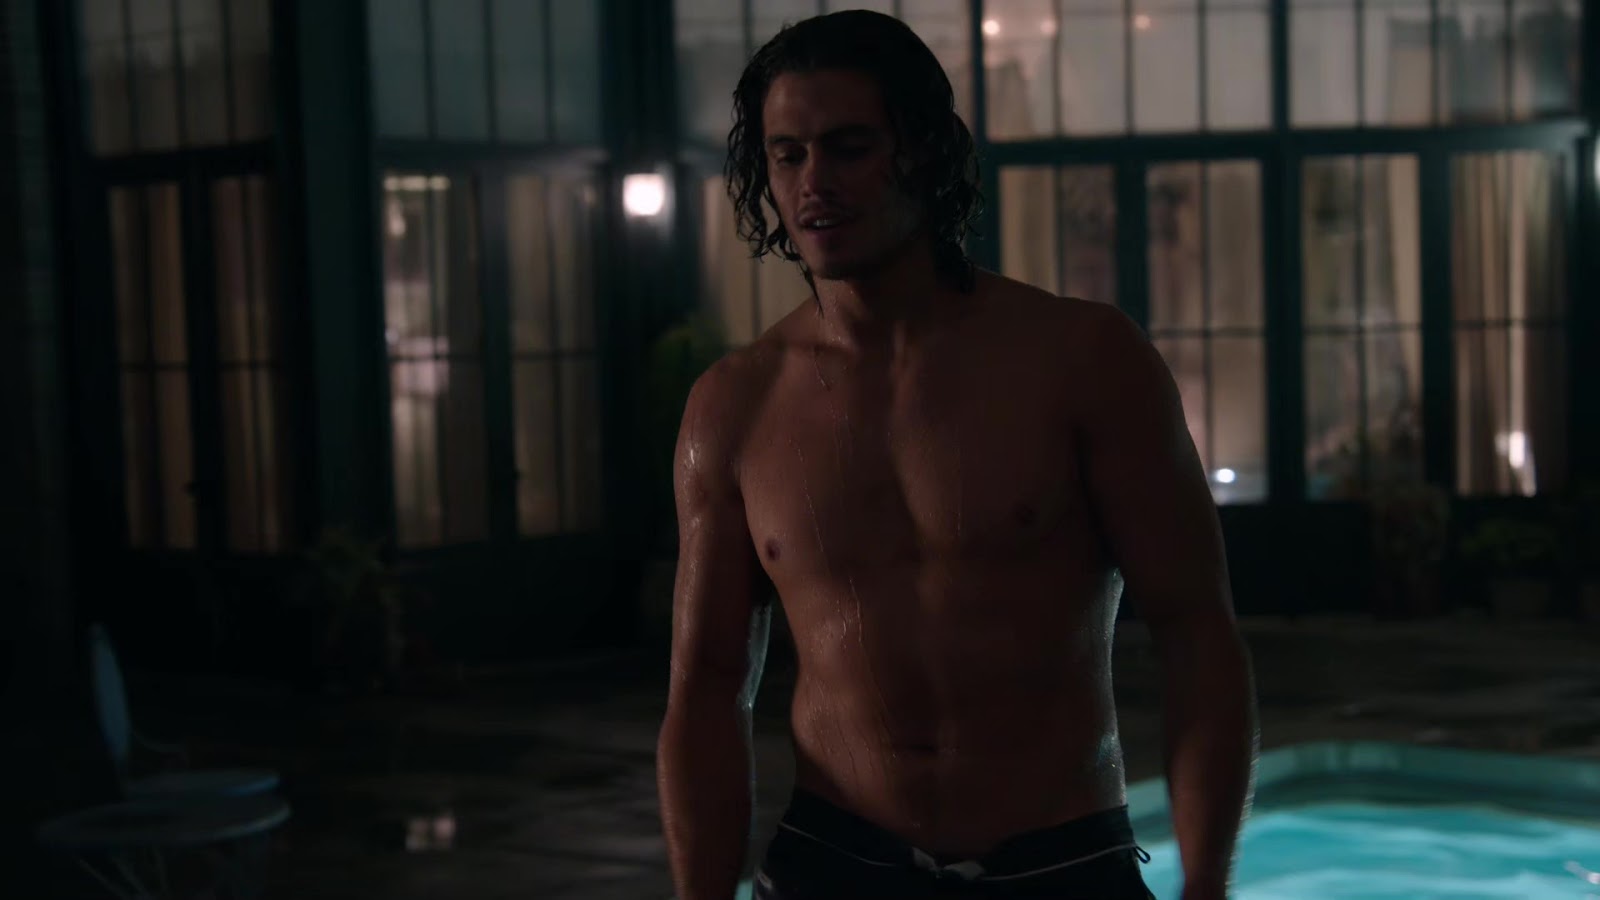 Tommy Martinez shirtless in Good Trouble 1-01 "DTLA" .